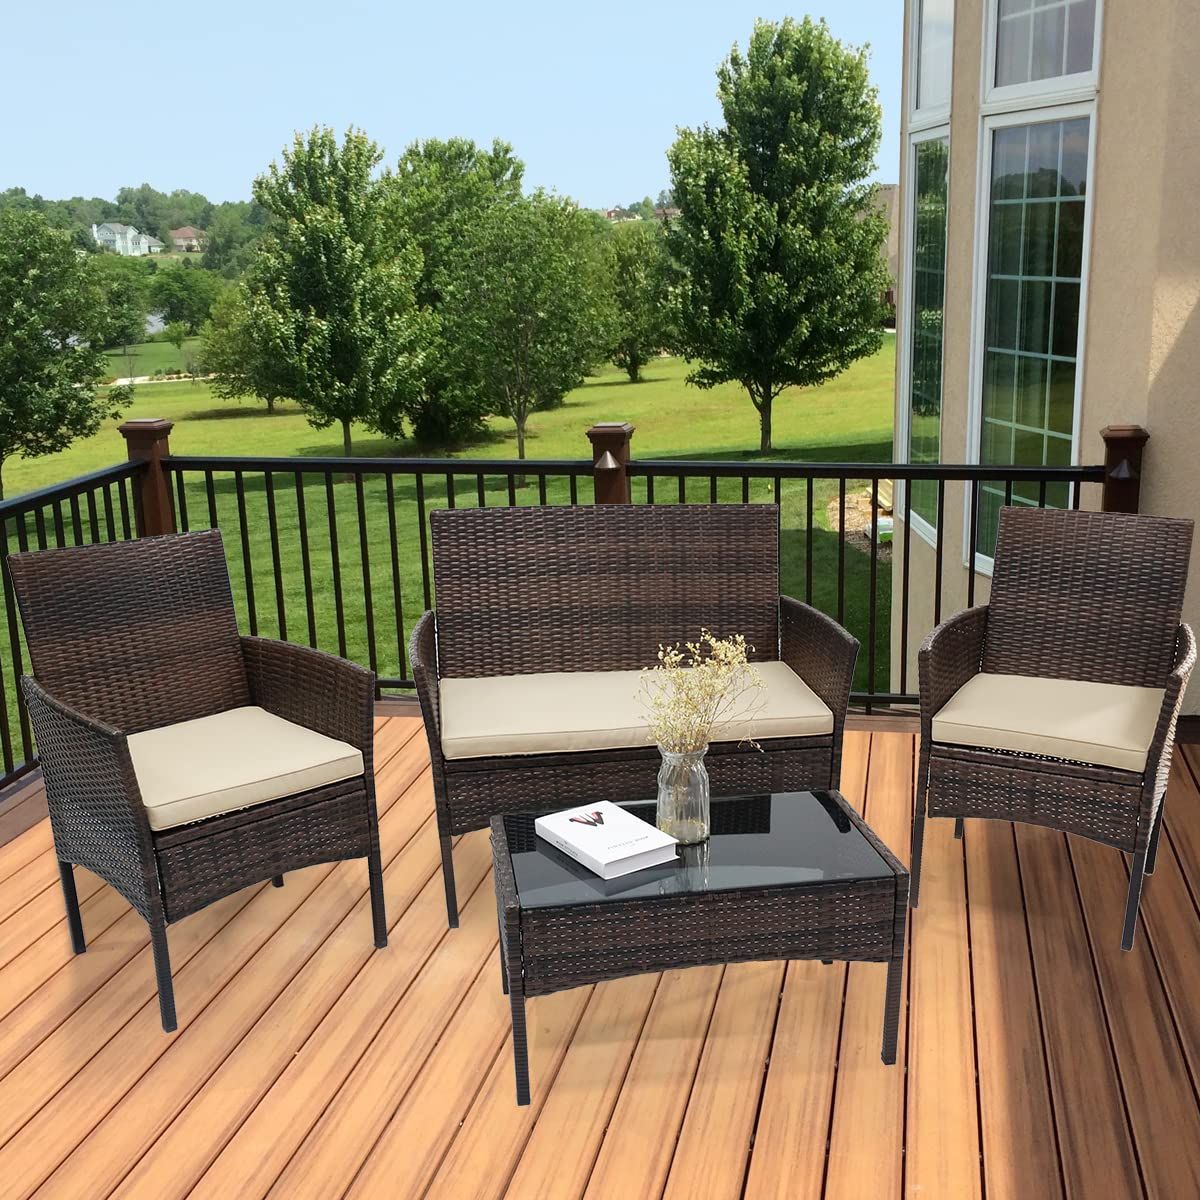 Balcony Furniture Set With Beige Cushions Throughout Best And Newest Amazon: Patio Furniture Set, 4 Pieces Porch Backyard Garden Outdoor  Furniture Rattan Chairs And Table Wicker Conversation Set With Beige  Cushions : Patio, Lawn & Garden (View 4 of 15)